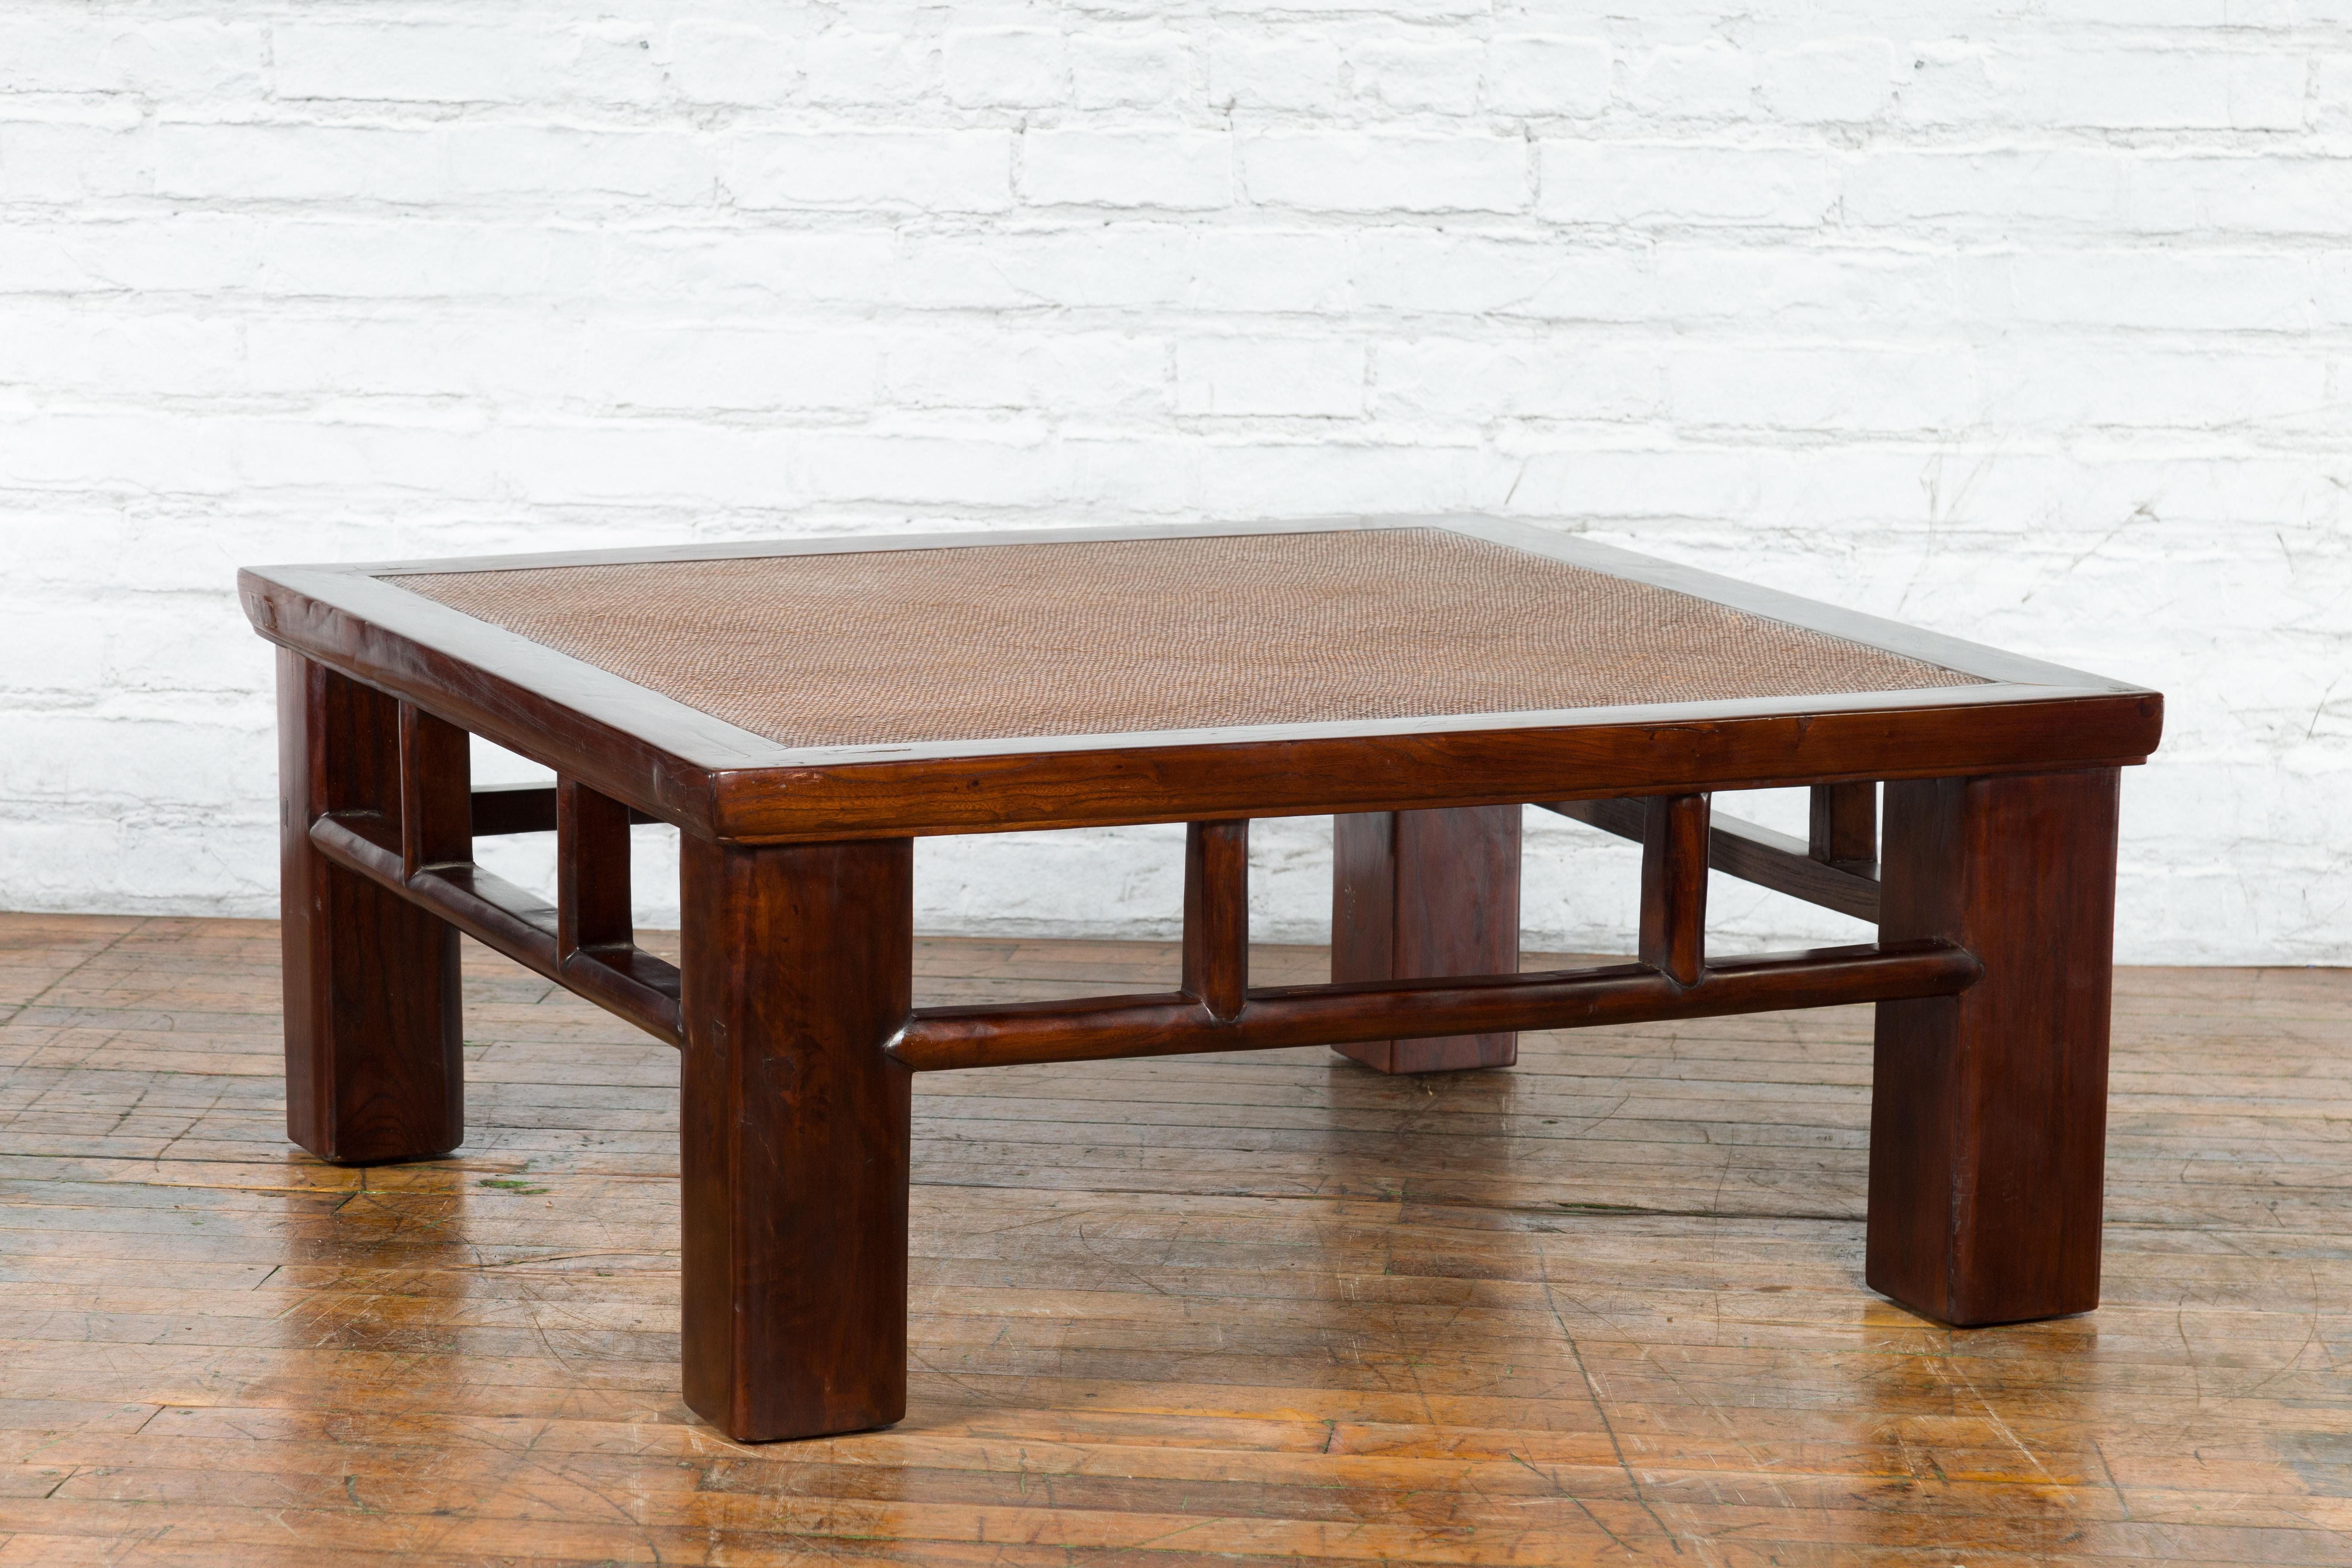 Chinese Early 20th Century Elmwood Coffee Table with Woven Rattan Top Inset For Sale 1